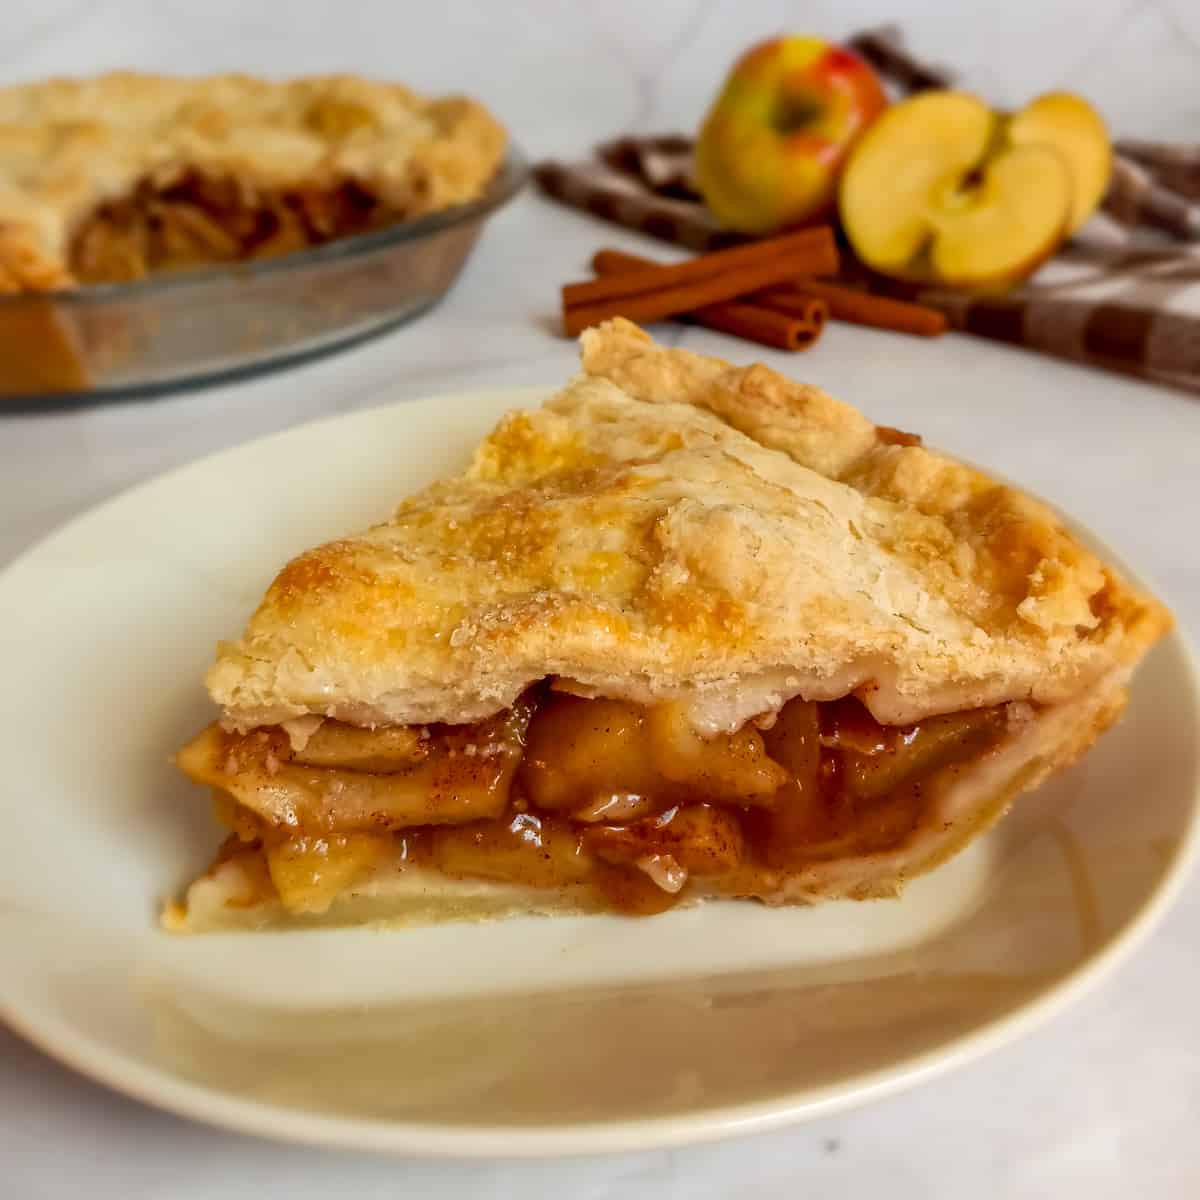 slice of old-fashioned Amish apple pie on a small plate with a 9" pie in the background.